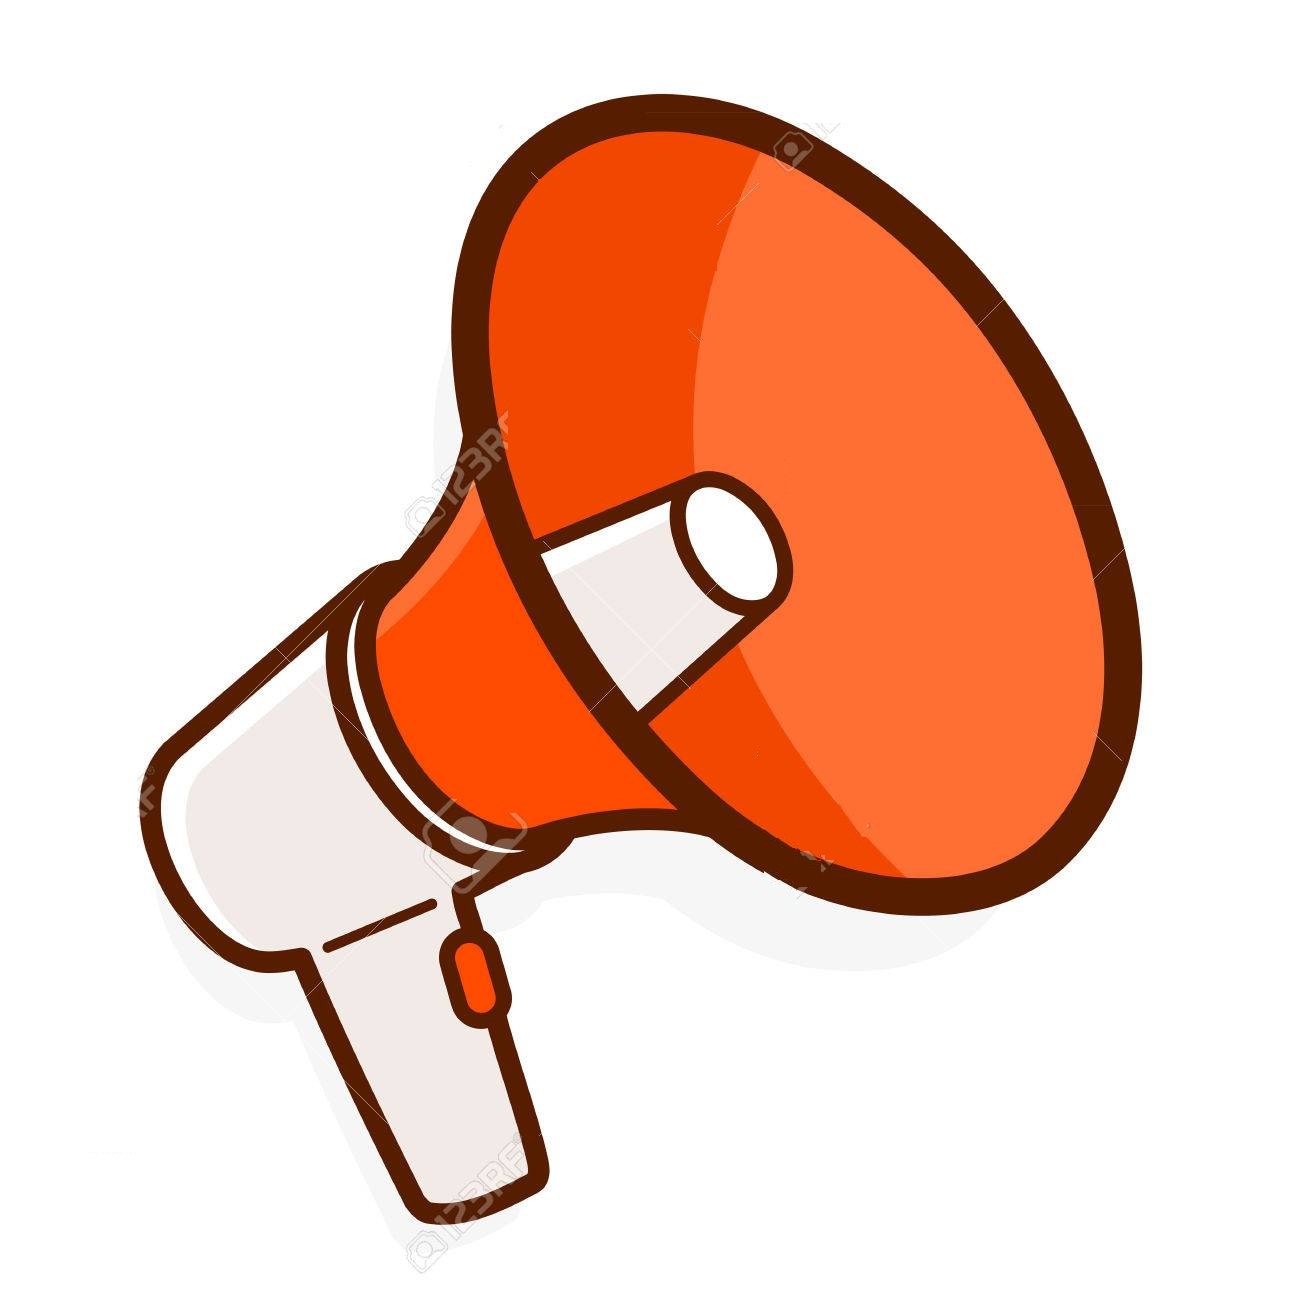 61971879 colorful red megaphone or bullhorn for amplifying the voice for protests rallies or public speaking 